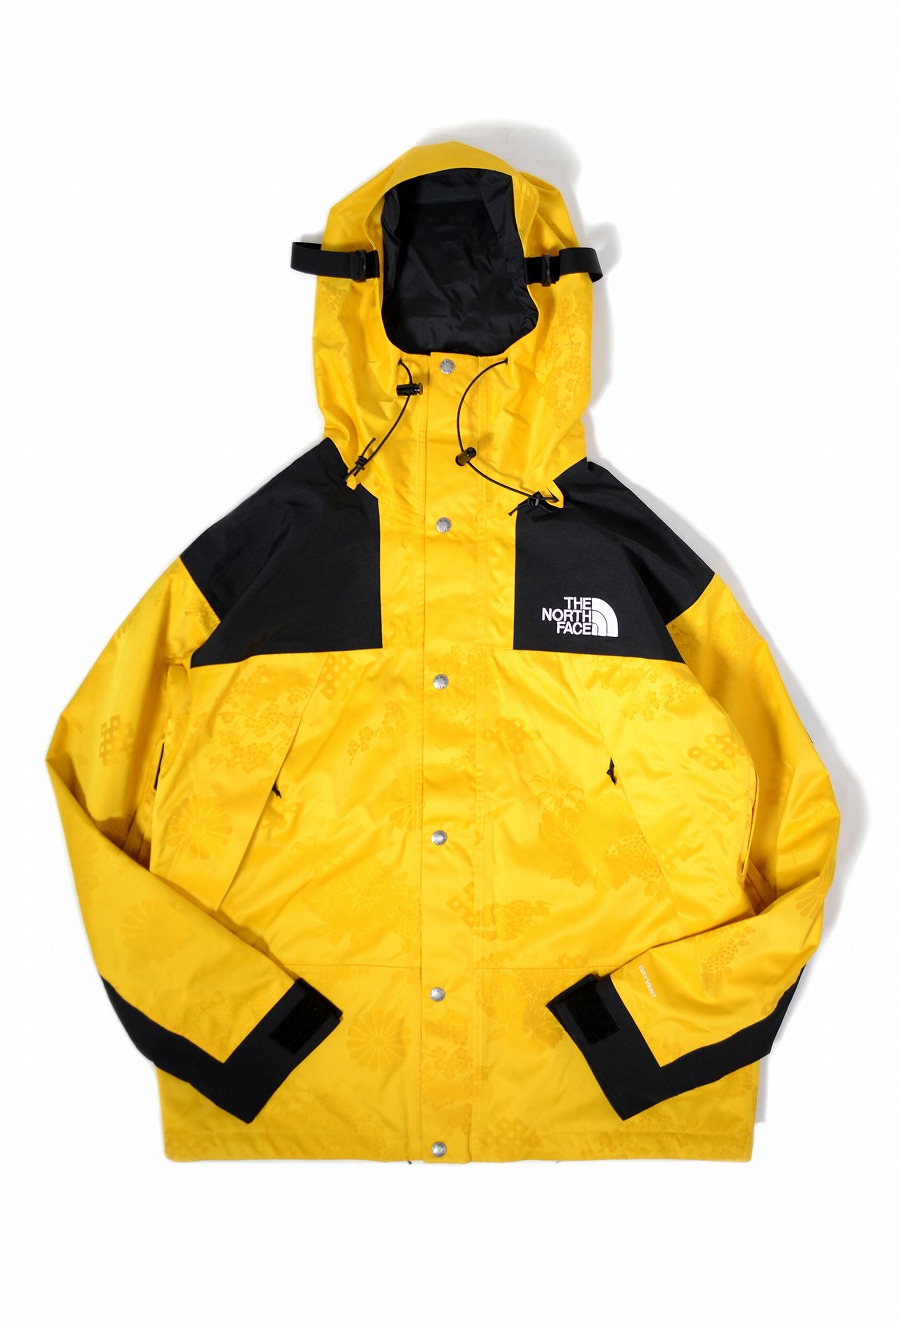 DAMAGEDONE OFFICIAL BLOG: NORDSTROM × THE NORTH FACE